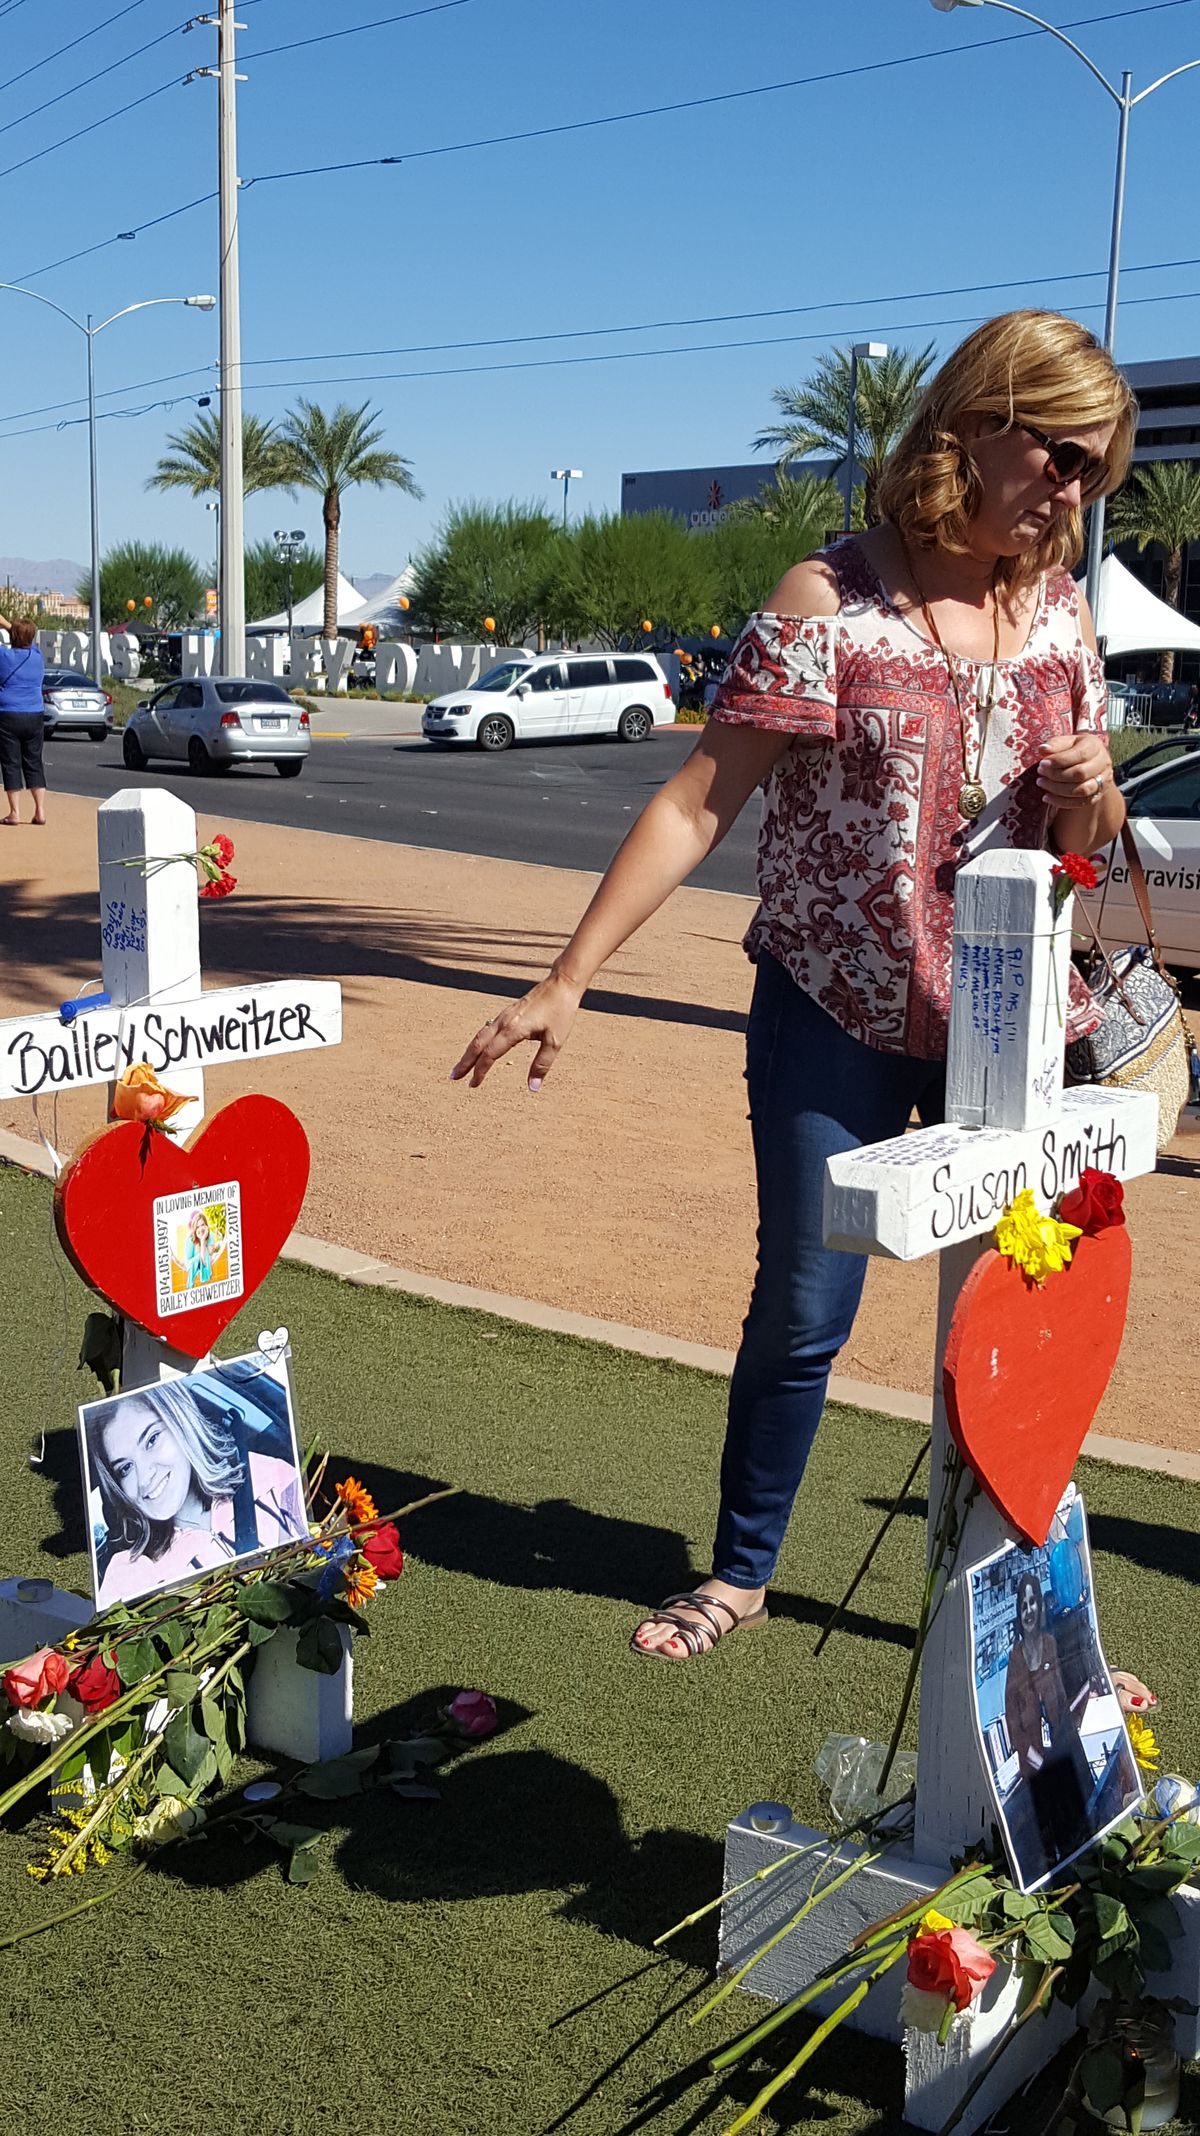 A family friend walks away from the cross of 20-year-old Bailey Schweitzer, one of the 58 victims of the Oct. 1 mass shooting in Las Vegas. | Miriam Di Nunzio